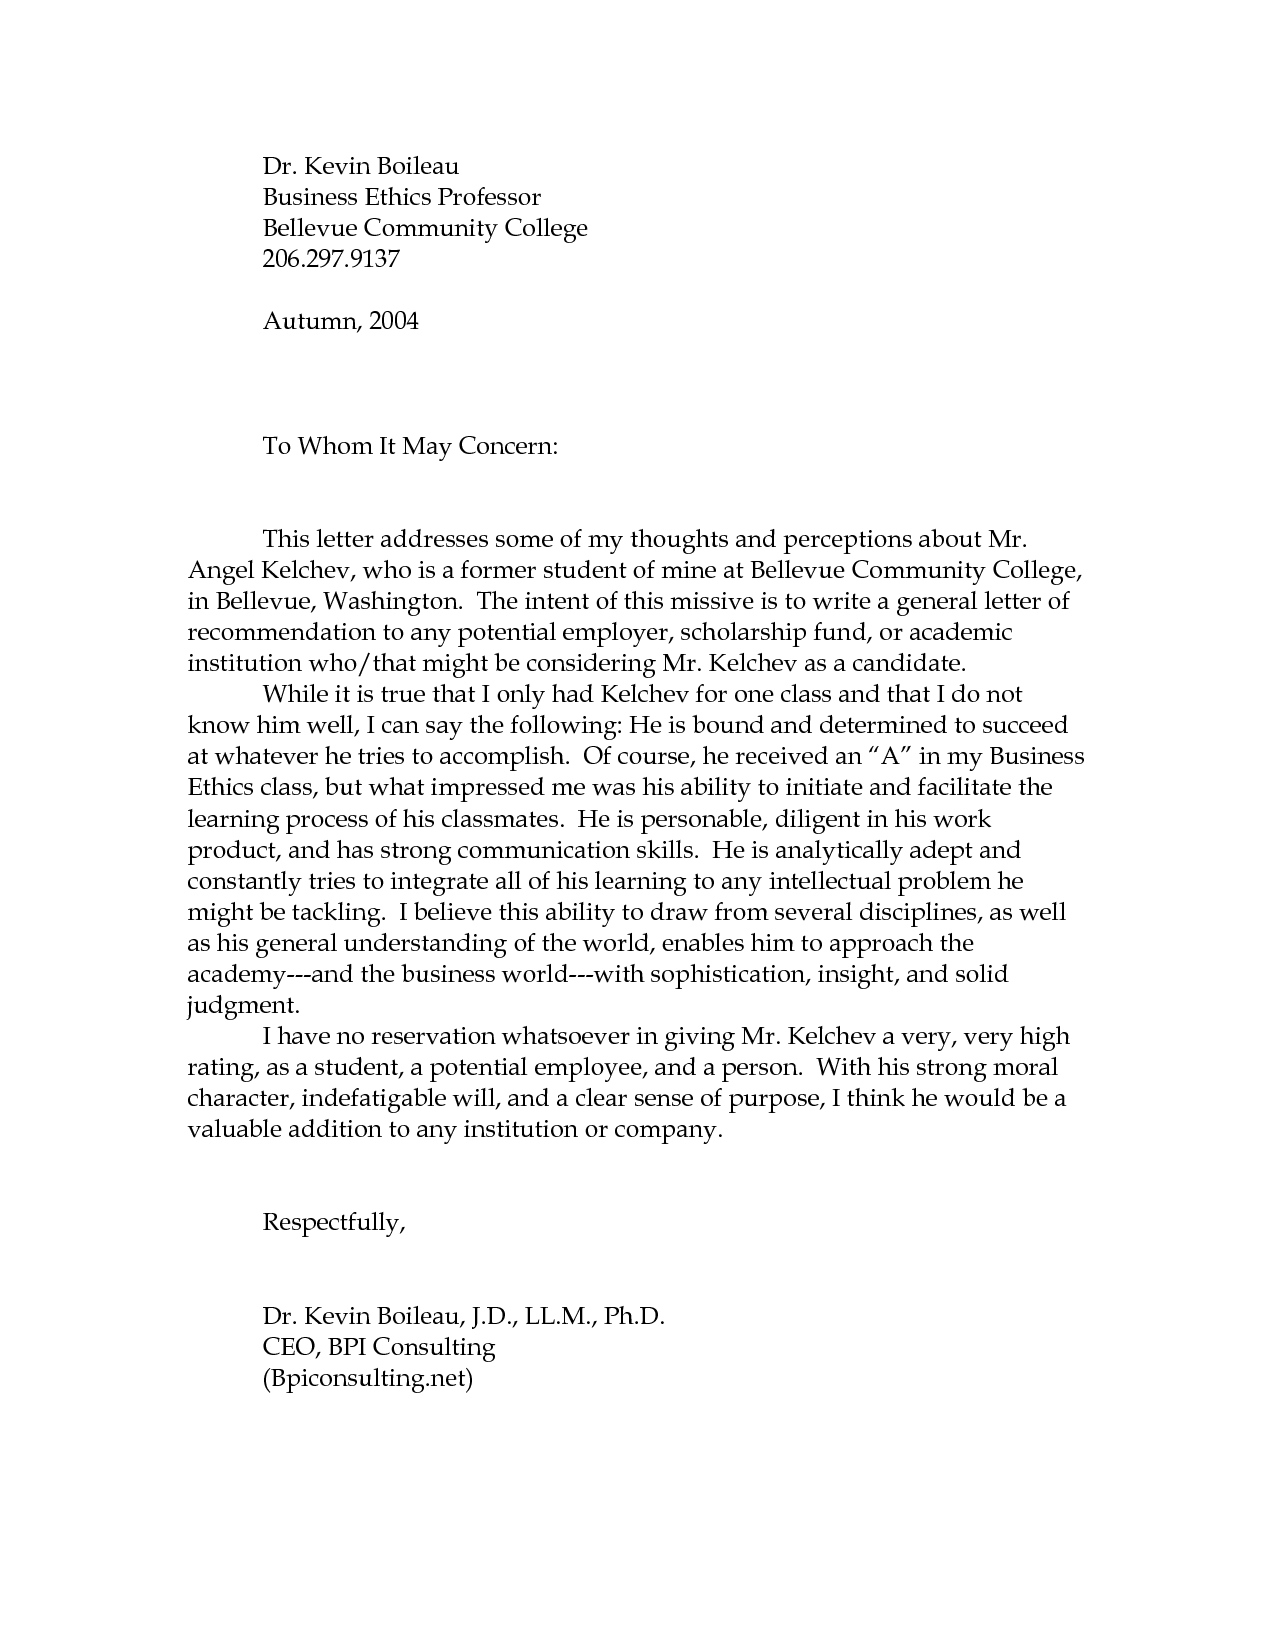 letter of recommendation phd candidate